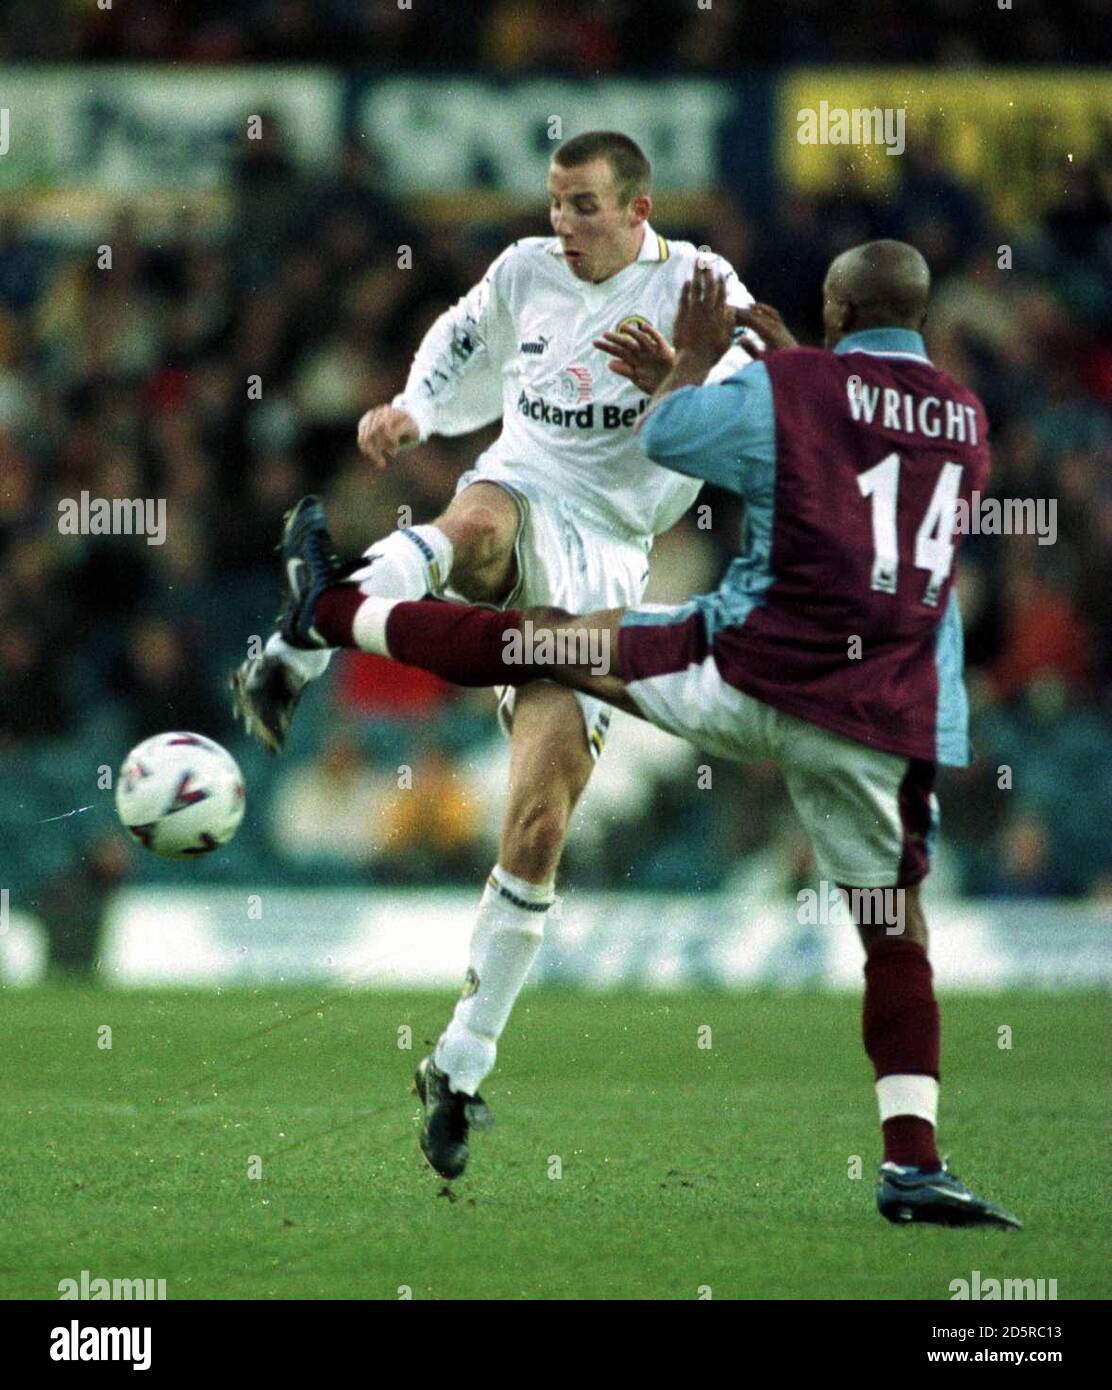 Leeds United's Lee Bowyer challenges for the ball with West Ham United's Ian Wright. Stock Photo